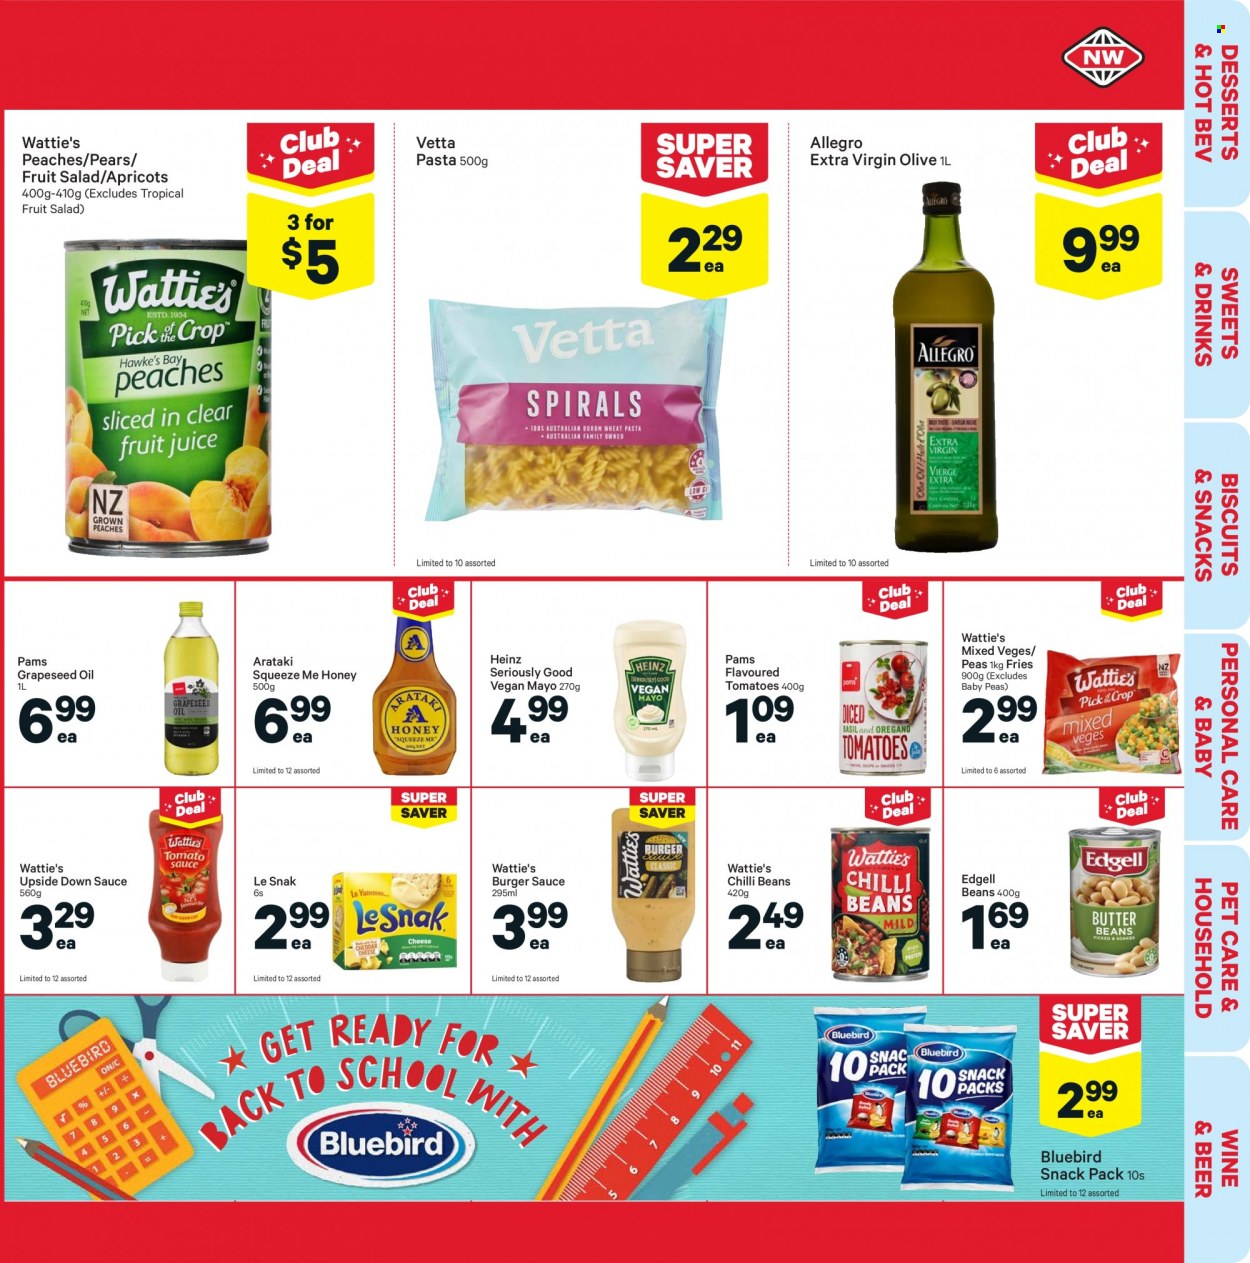 thumbnail - New World mailer - 11.10.2021 - 17.10.2021 - Sales products - beans, tomatoes, peas, salad, pears, apricots, peaches, pasta, sauce, Wattie's, mayonnaise, potato fries, biscuit, Bluebird, Le Snak, Heinz, fruit salad, extra virgin olive oil, oil, grape seed oil, honey, beer. Page 11.